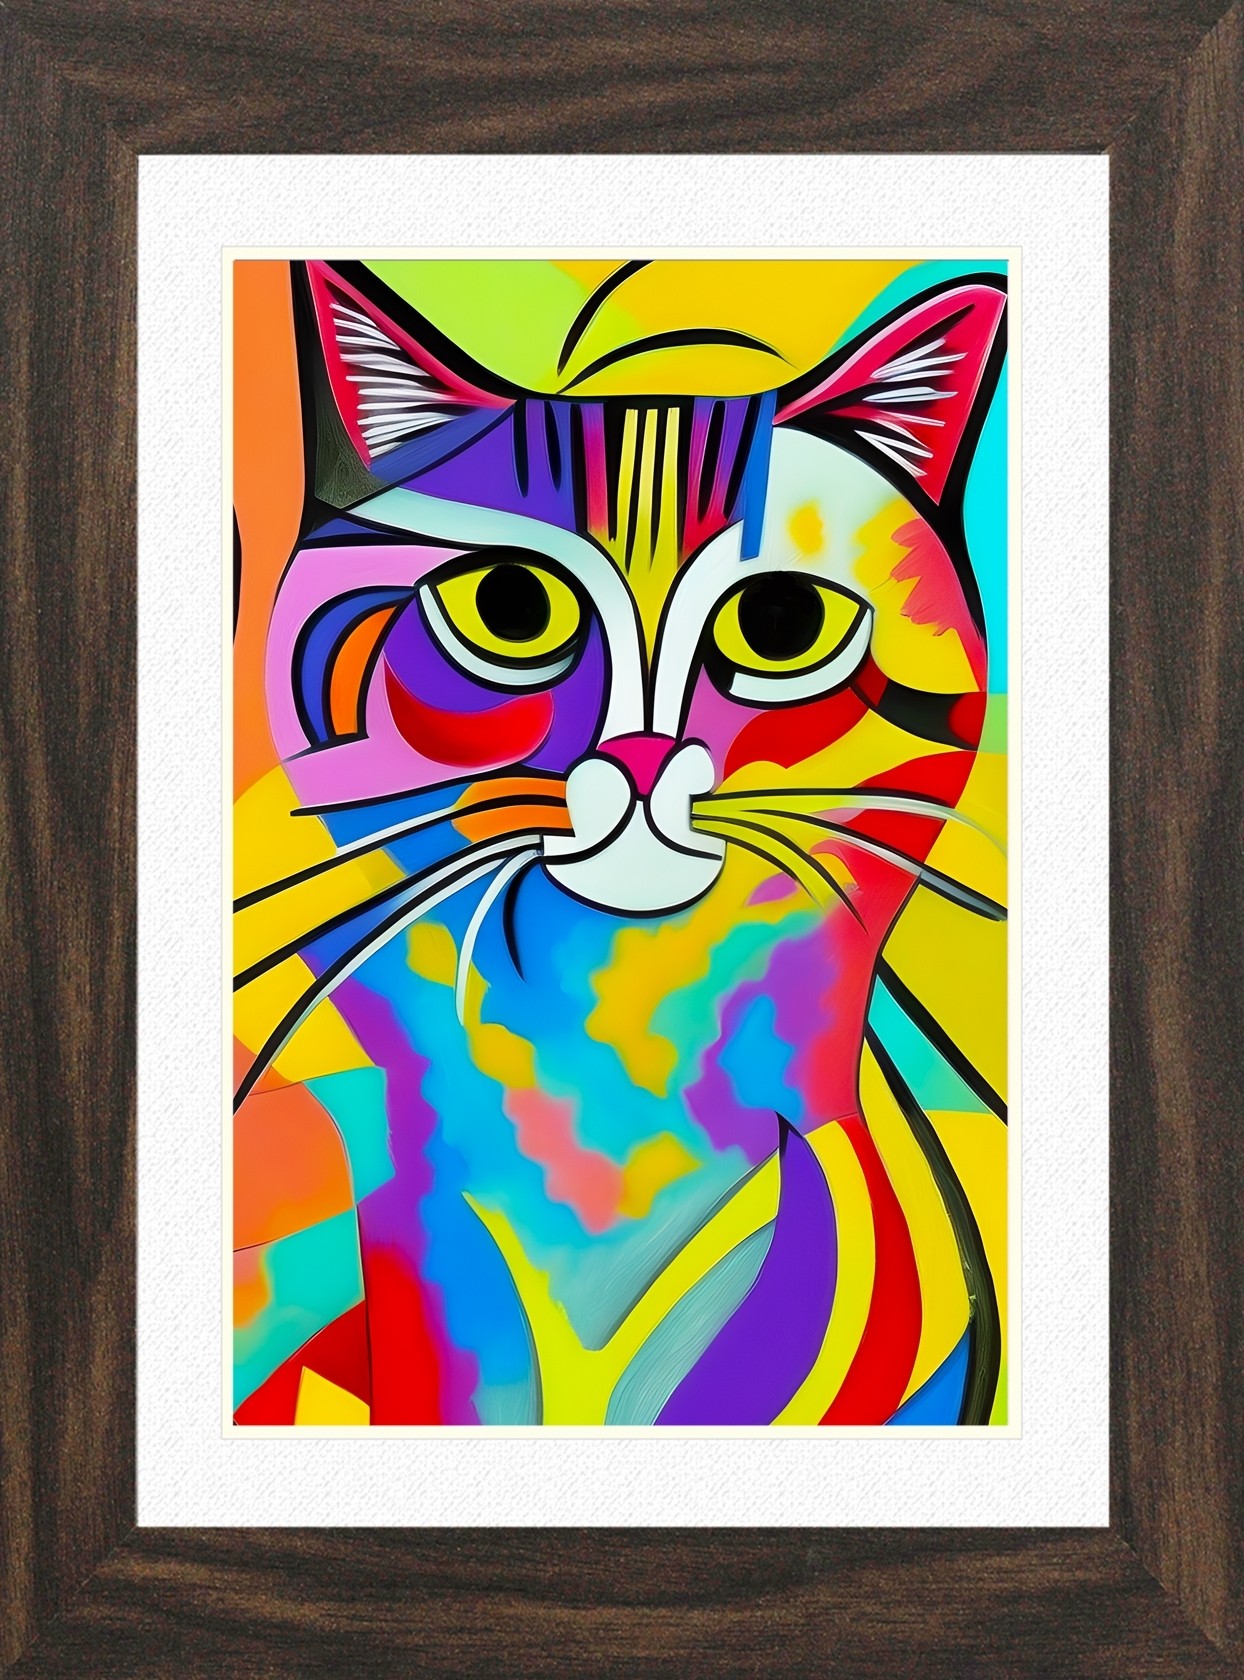 Cat Animal Picture Framed Colourful Abstract Art (A4 Walnut Frame)